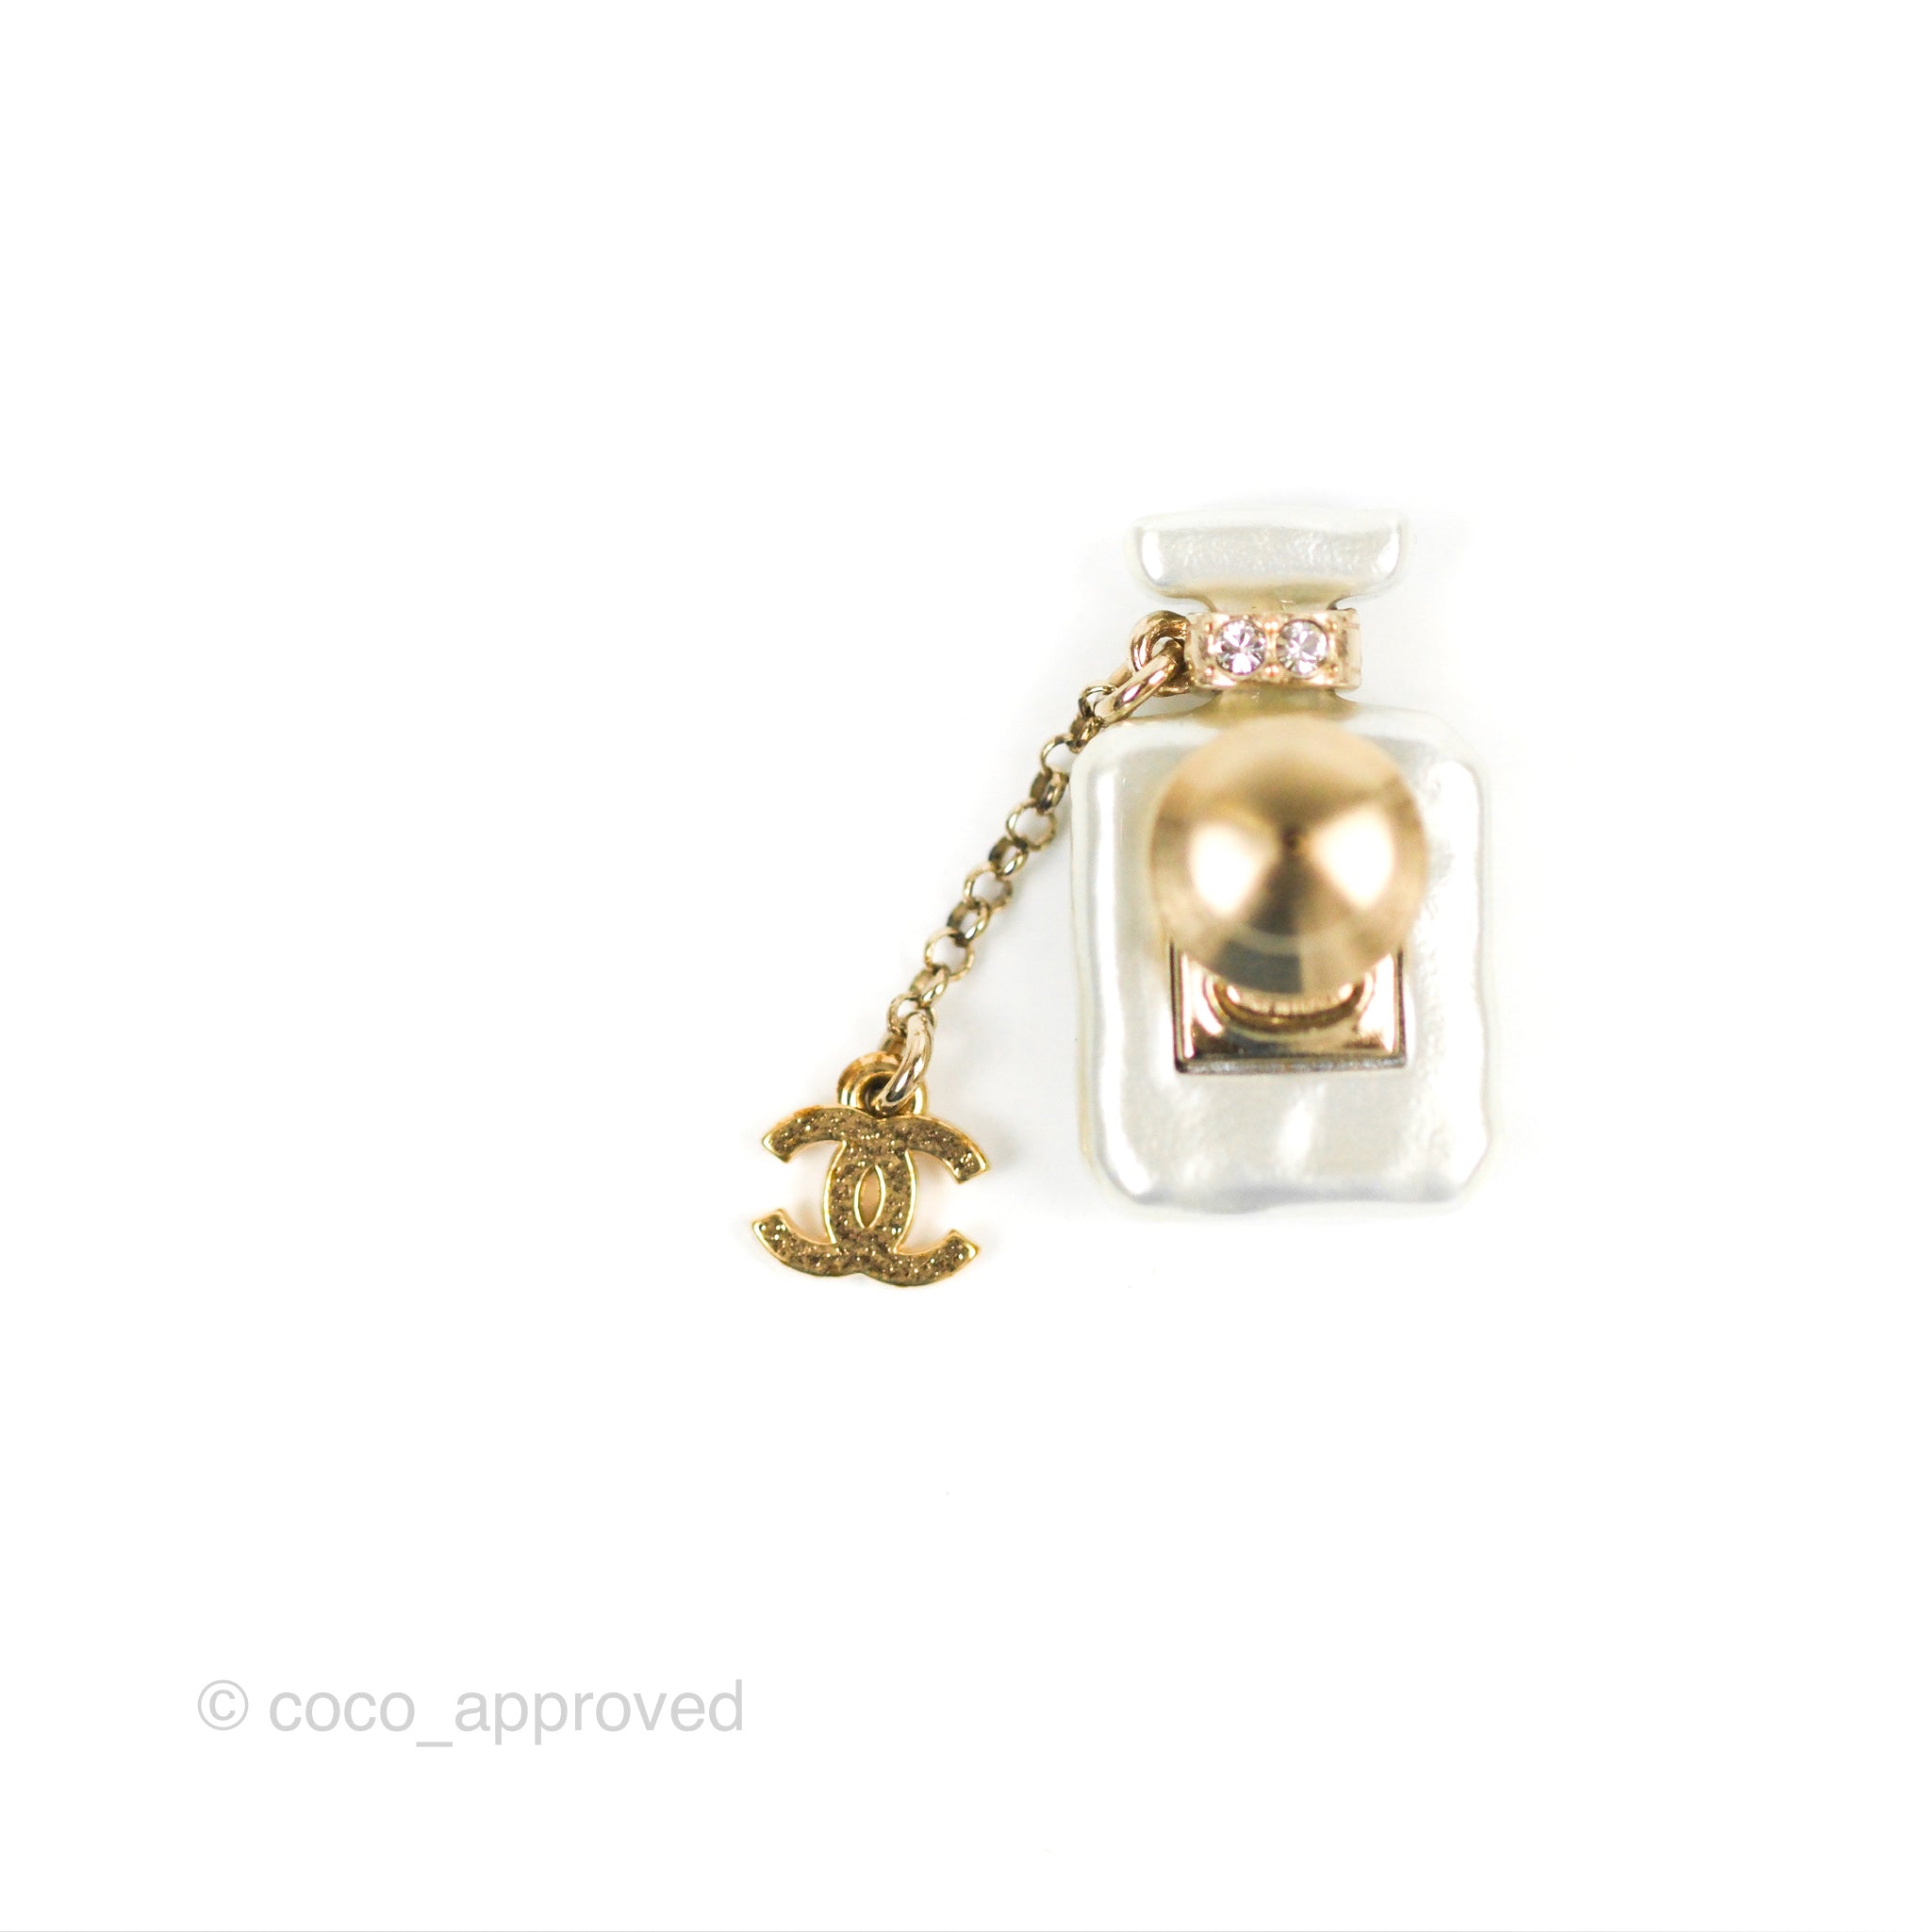 Chanel No5 Perfume Bottle Pearl Pin Brooch Gold Tone 22S